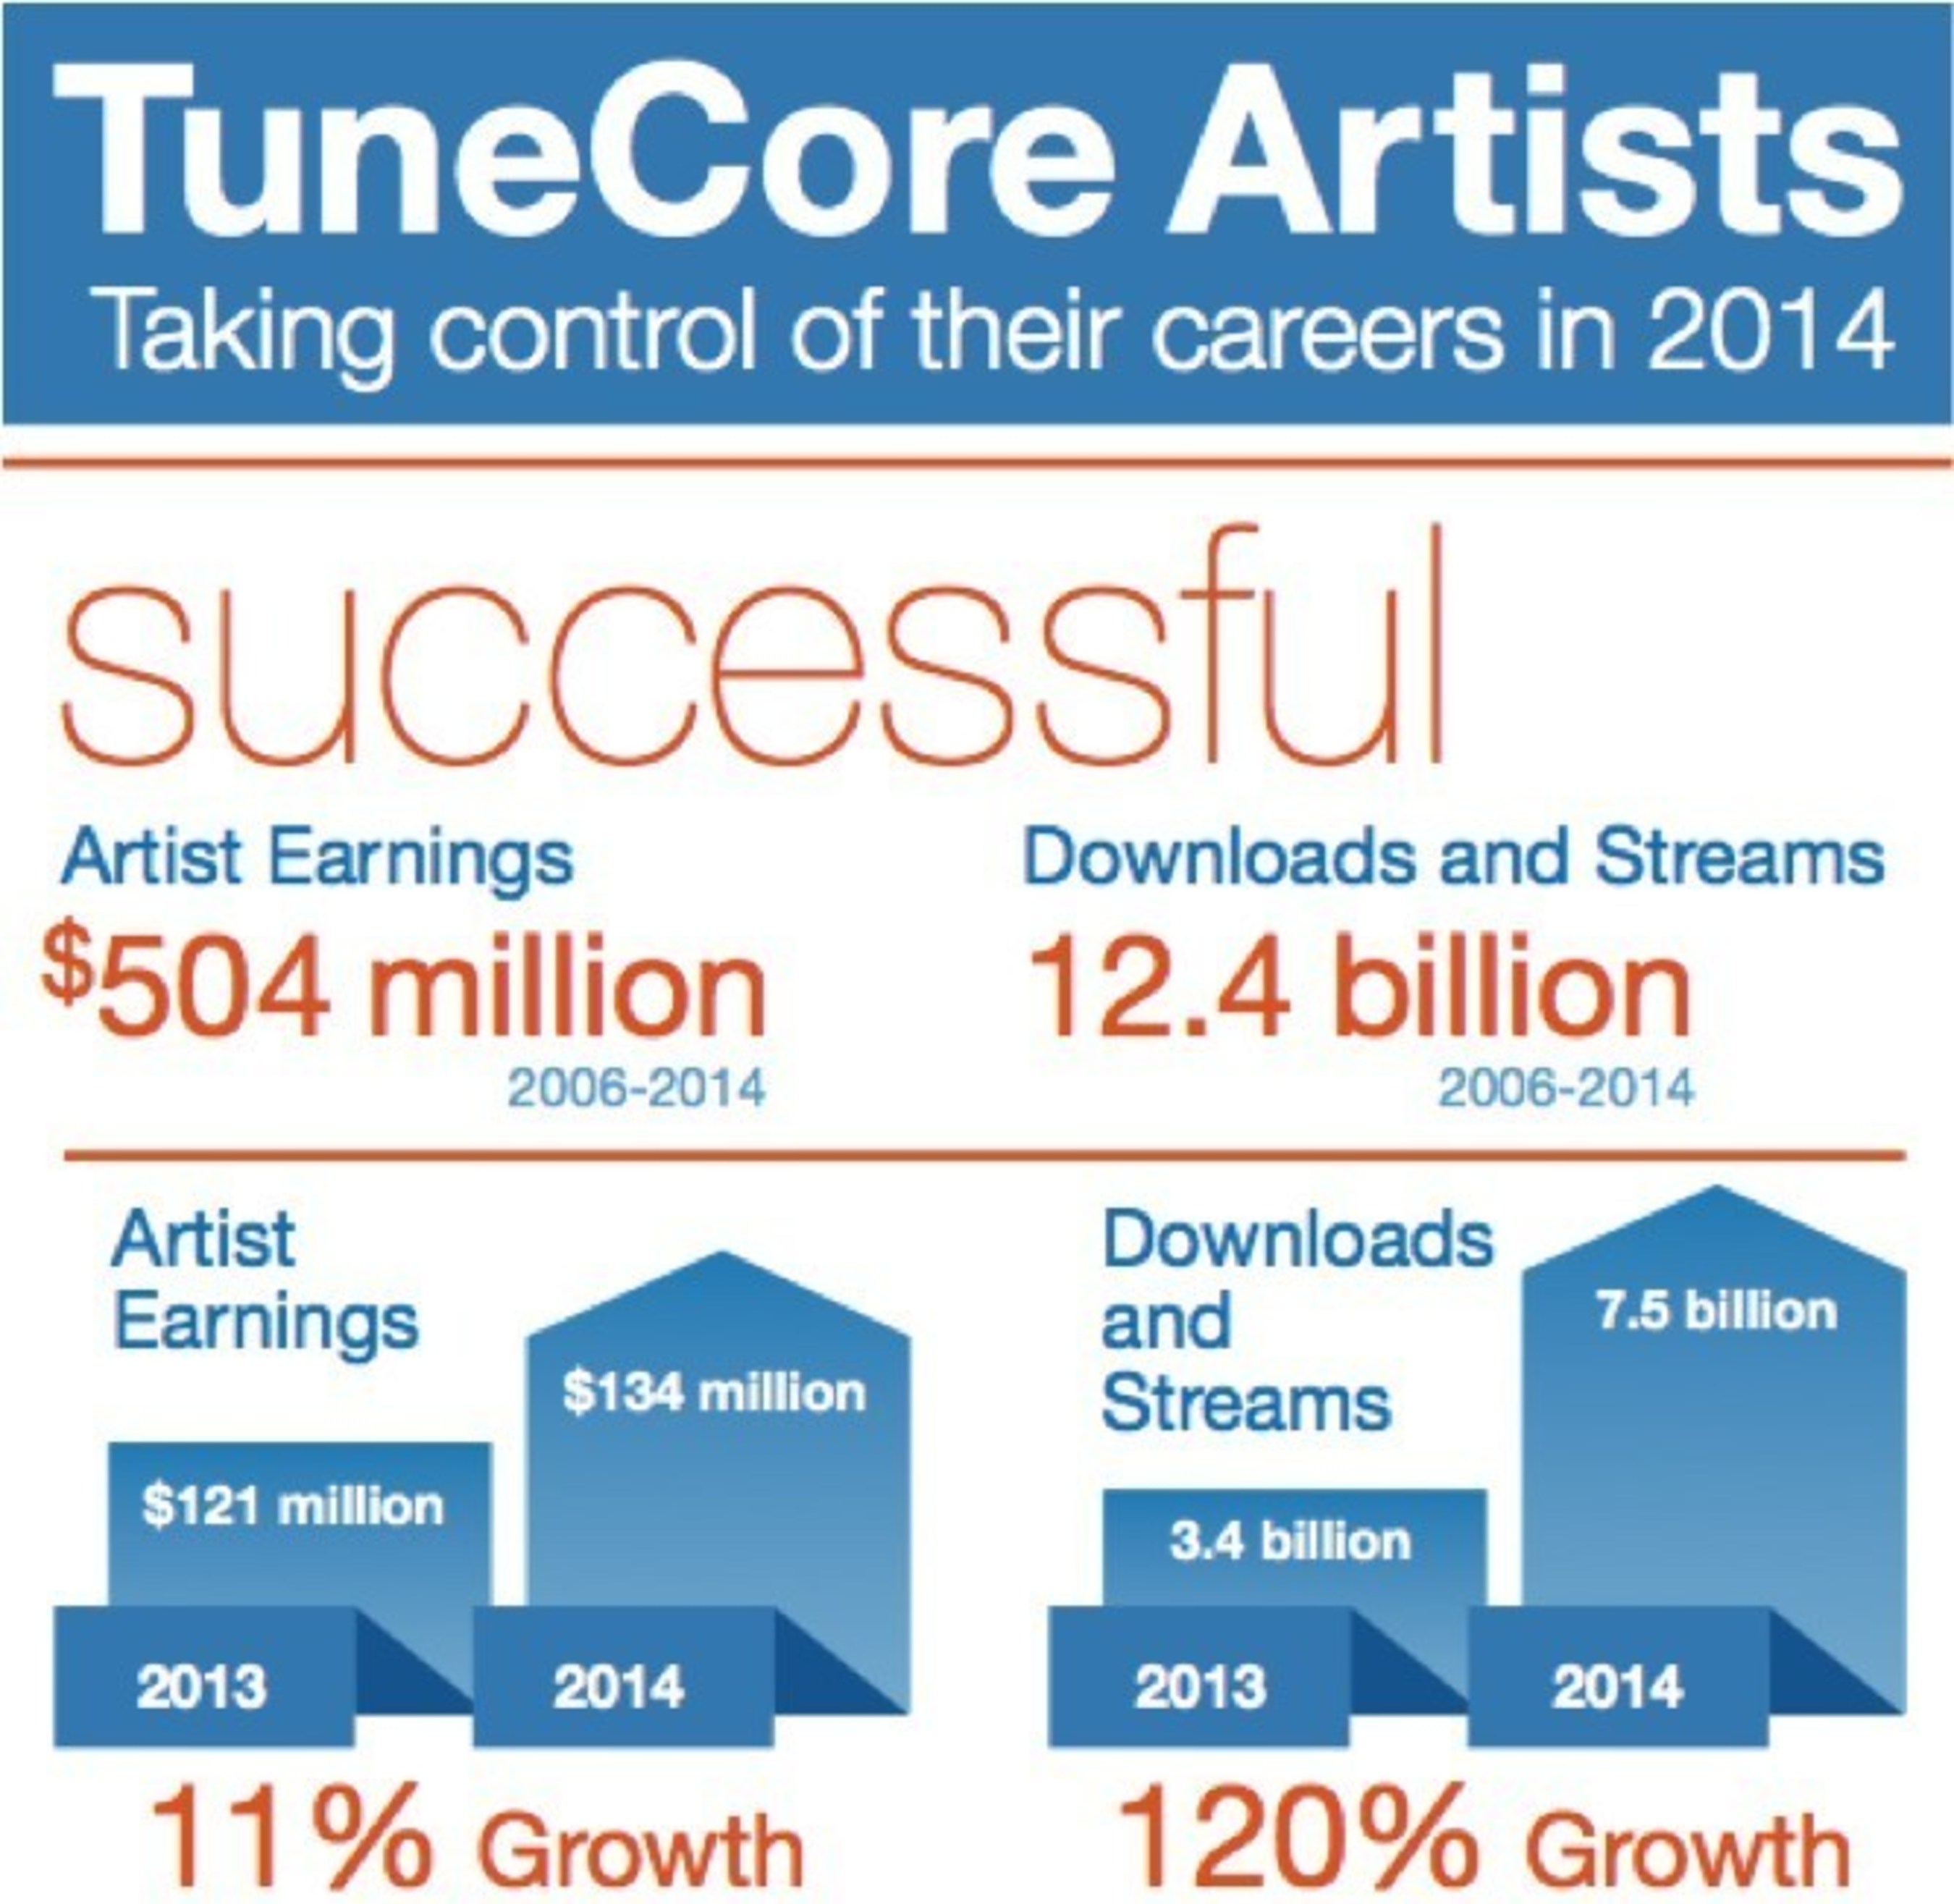 TuneCore Artists Taking Control of Their Careers: 2014 Artist Earnings, Streams & Downloads